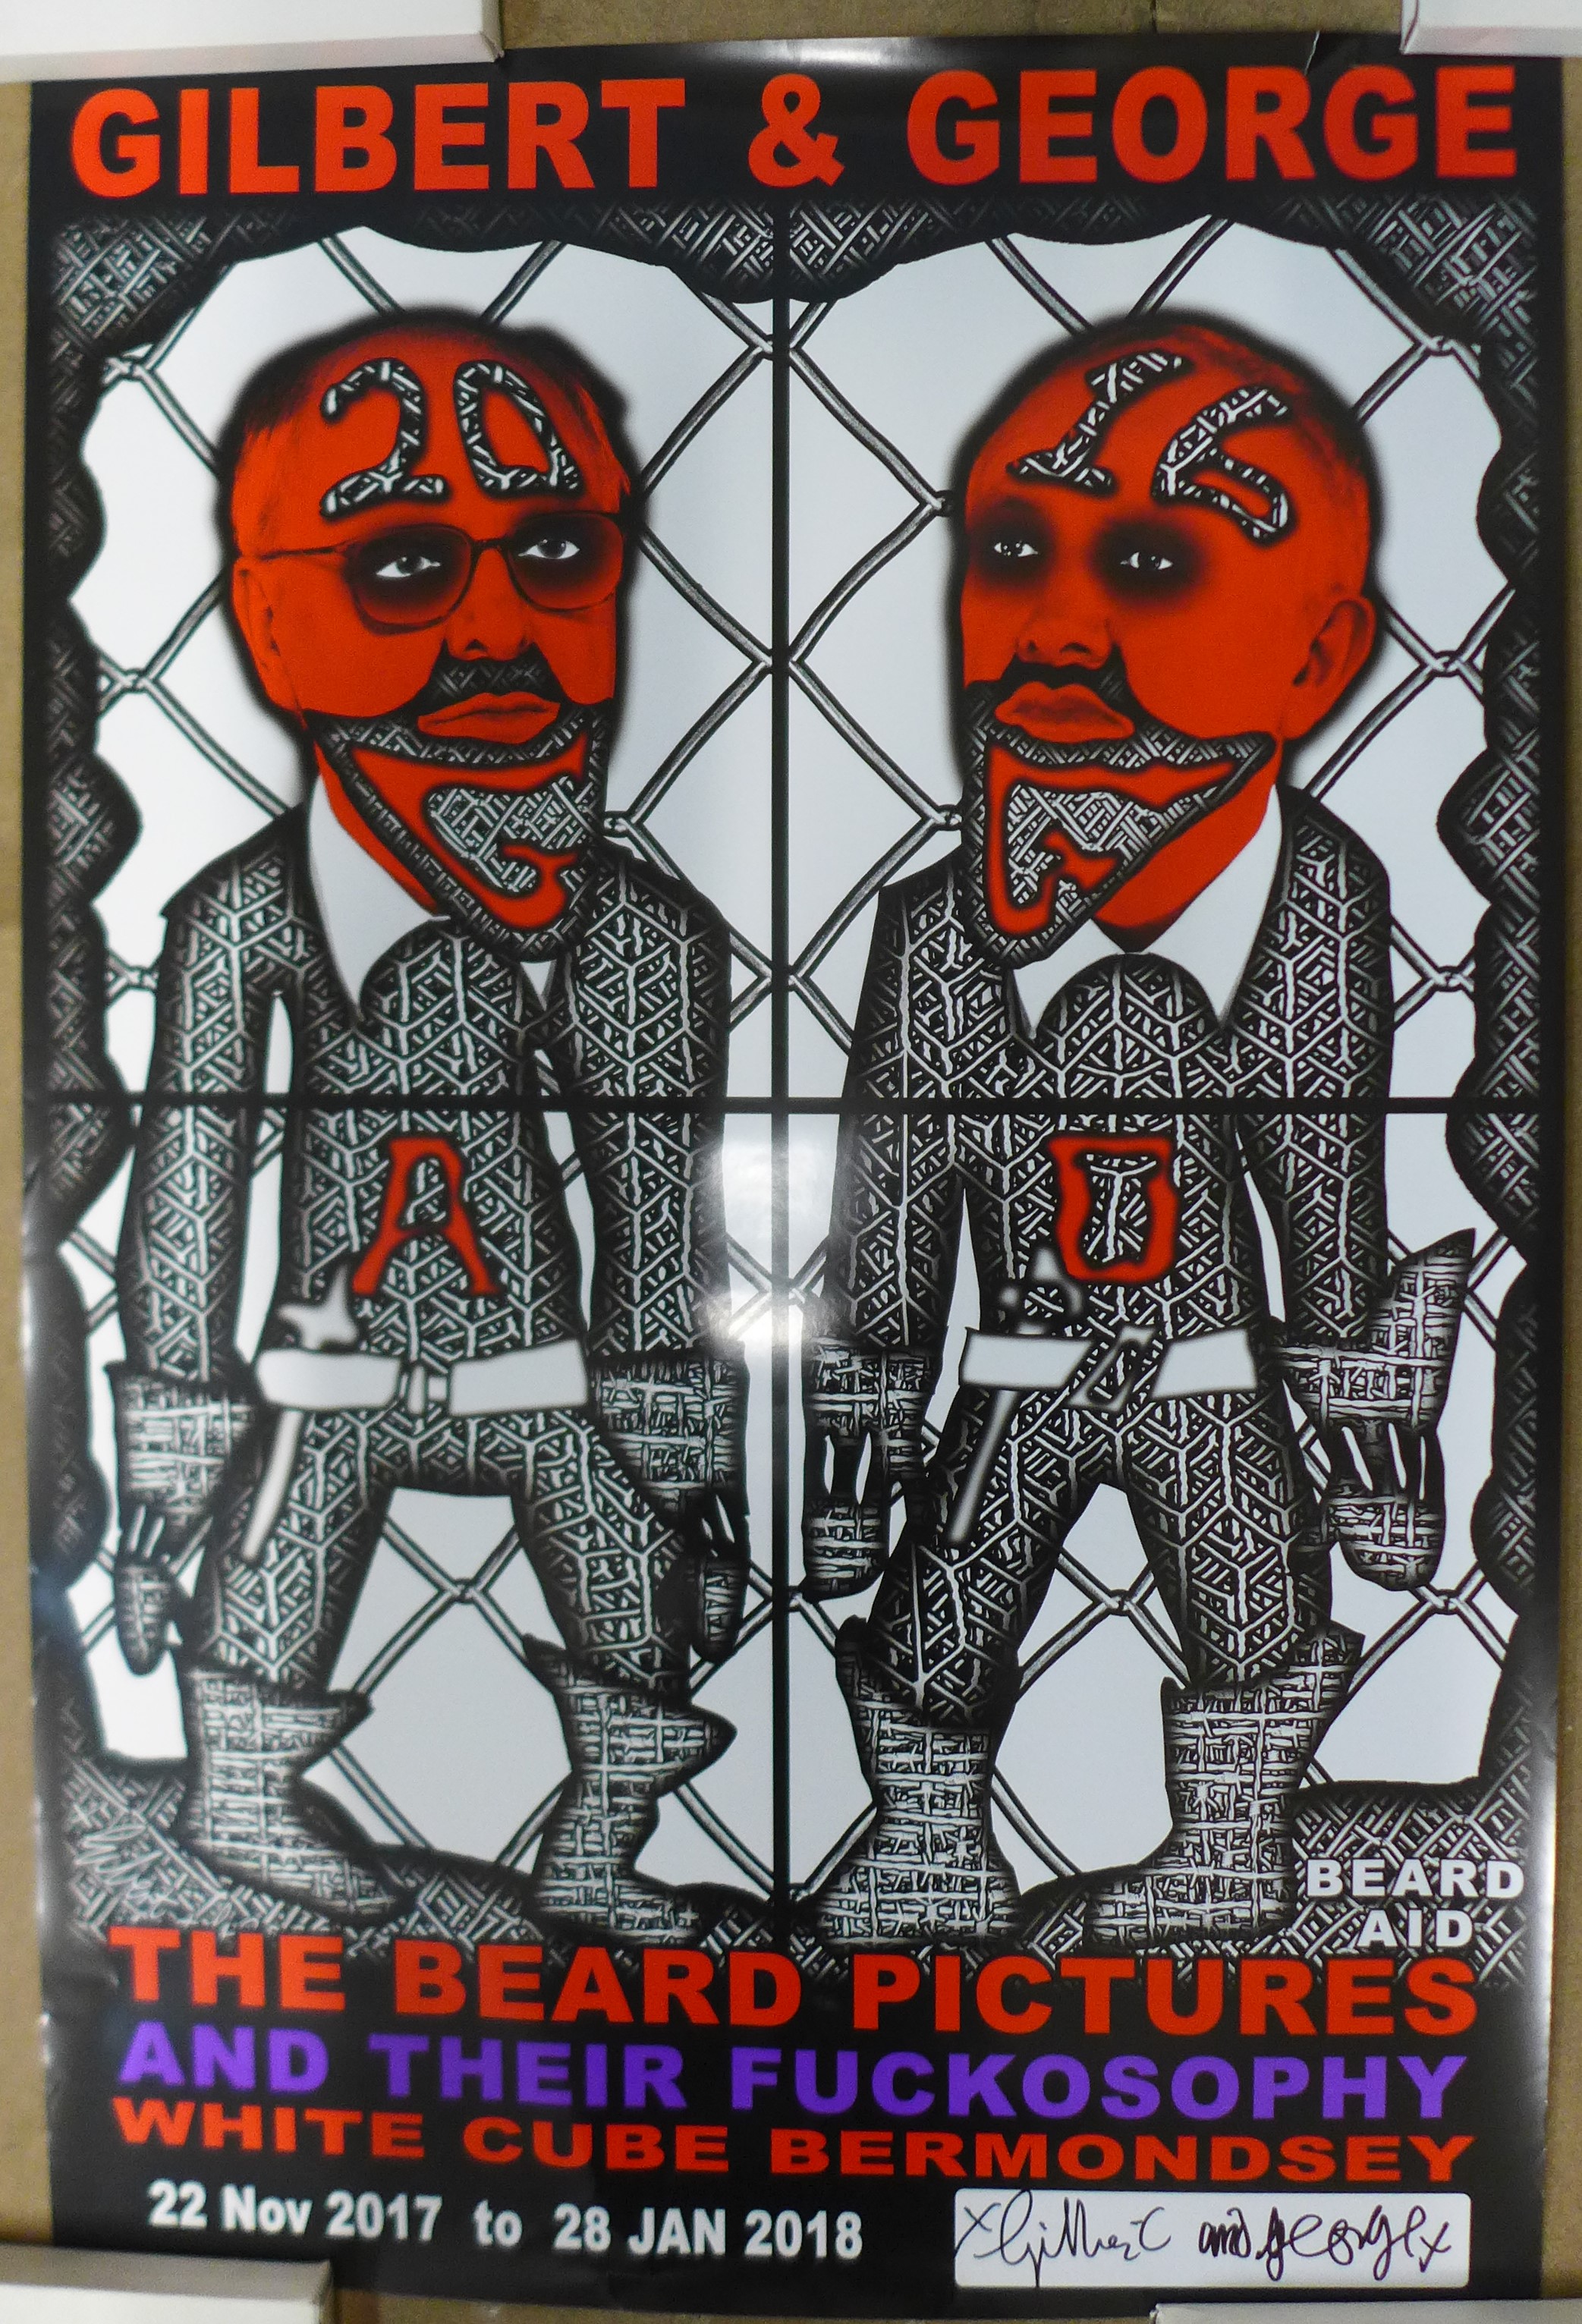 A set of six signed Gilbert & George posters, The Beard Pictures and Their Fuckosophy, 2017, 600 x - Image 6 of 6